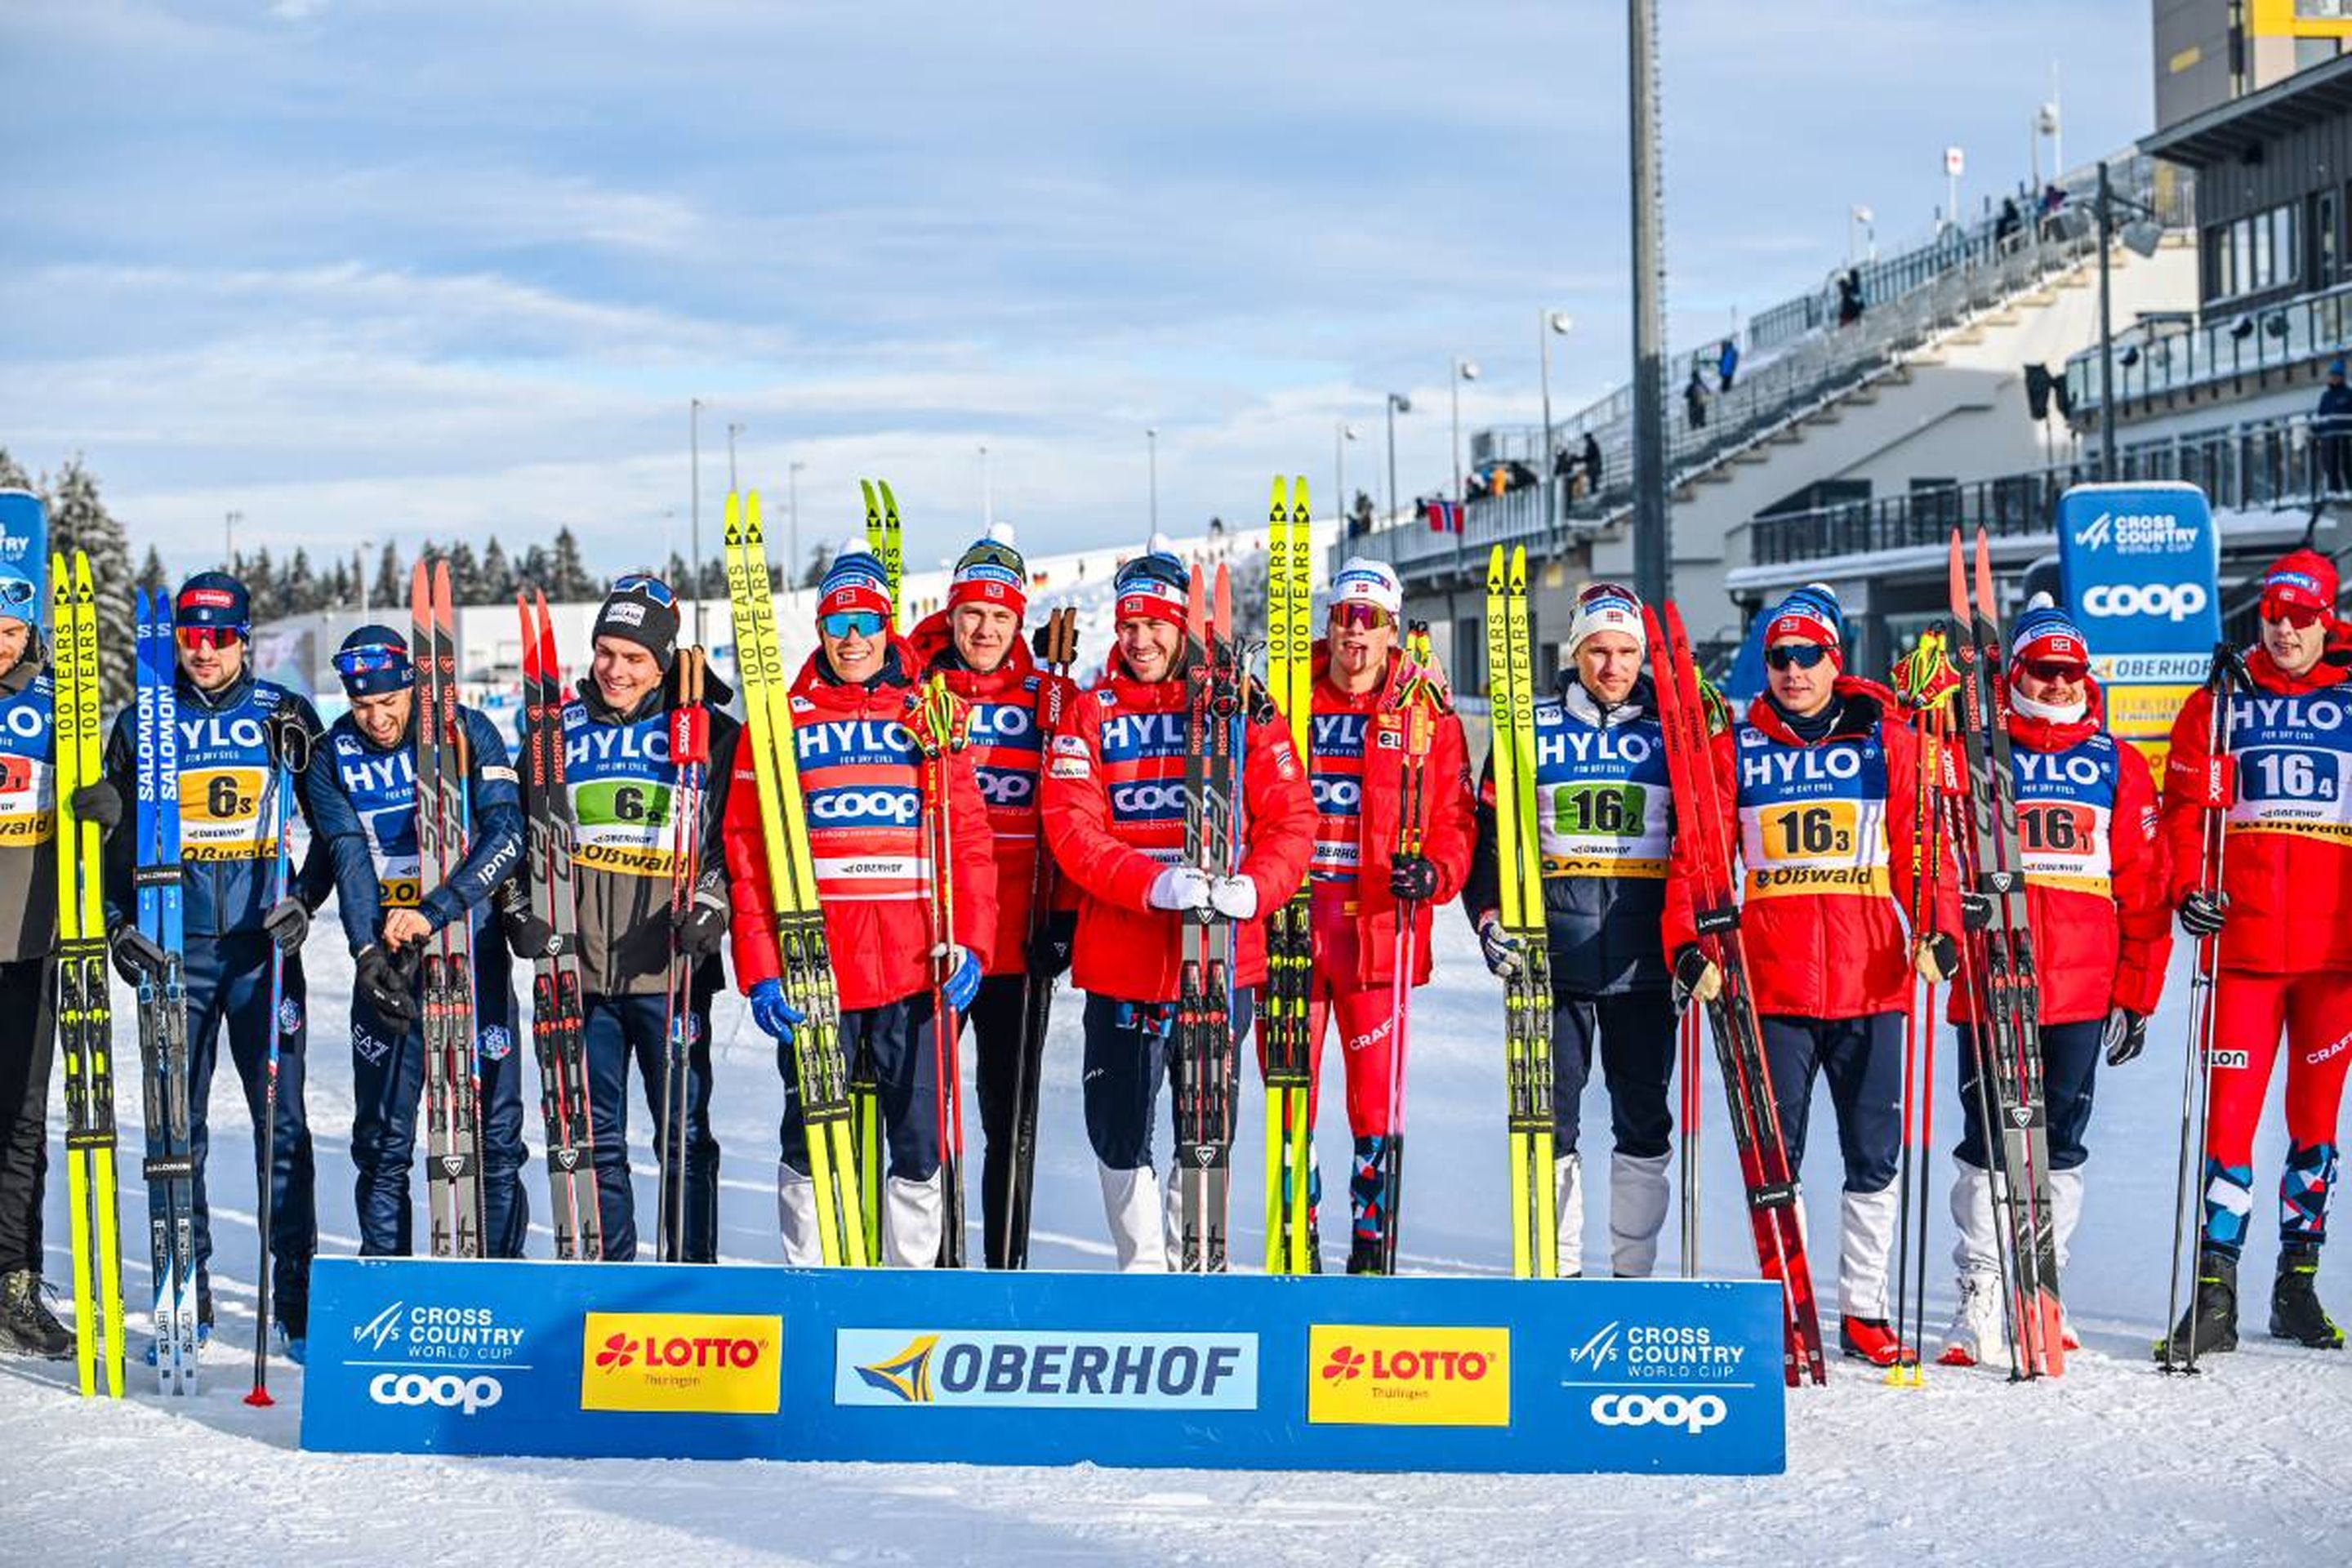 Italy, Norway I and Norway II on the podium © NordicFocus